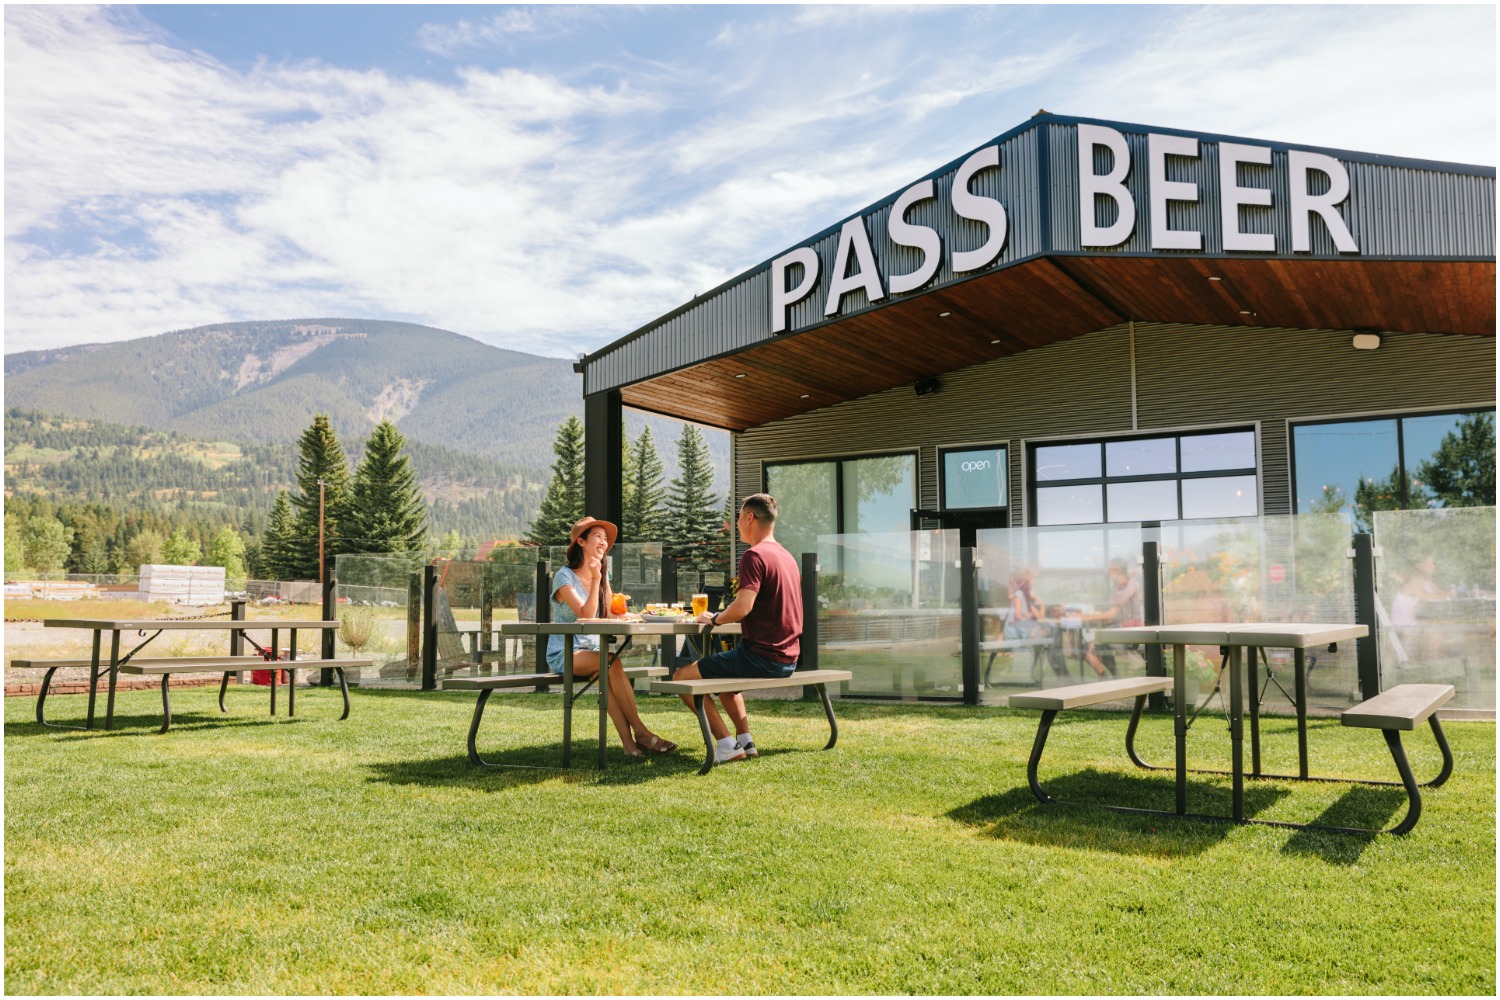 The Pass Beer Co